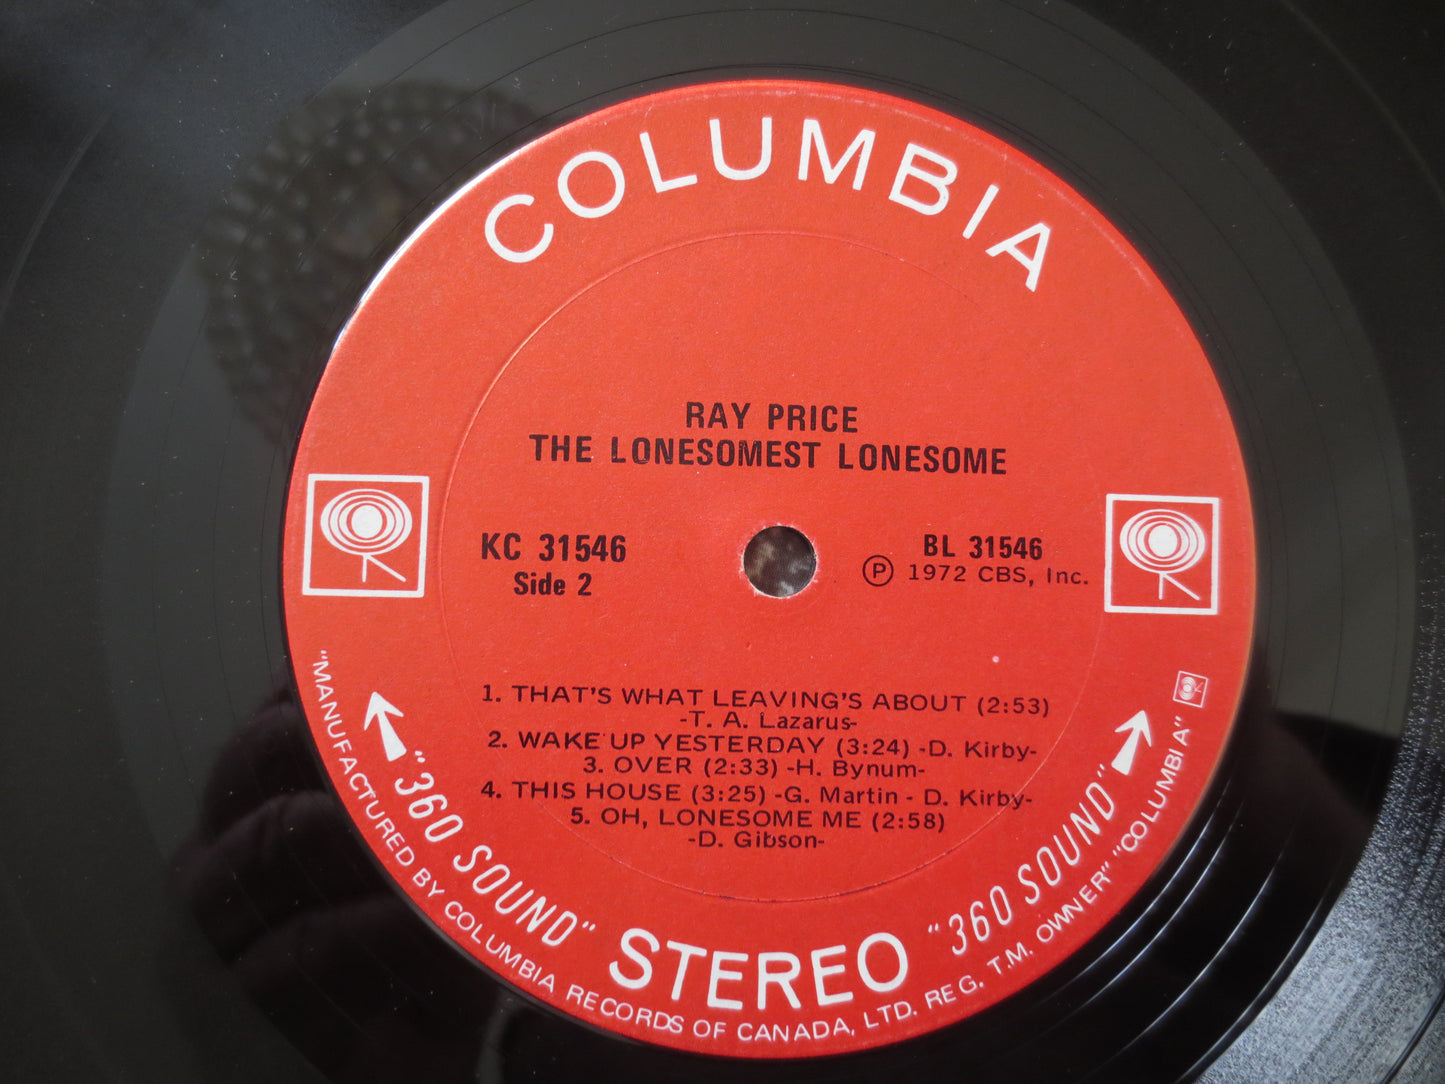 RAY PRICE, The LONESOMEST, Country Records, Ray Price Record, Ray Price Album, Record Vinyl, Vinyl Album, Lps, 1972 Records